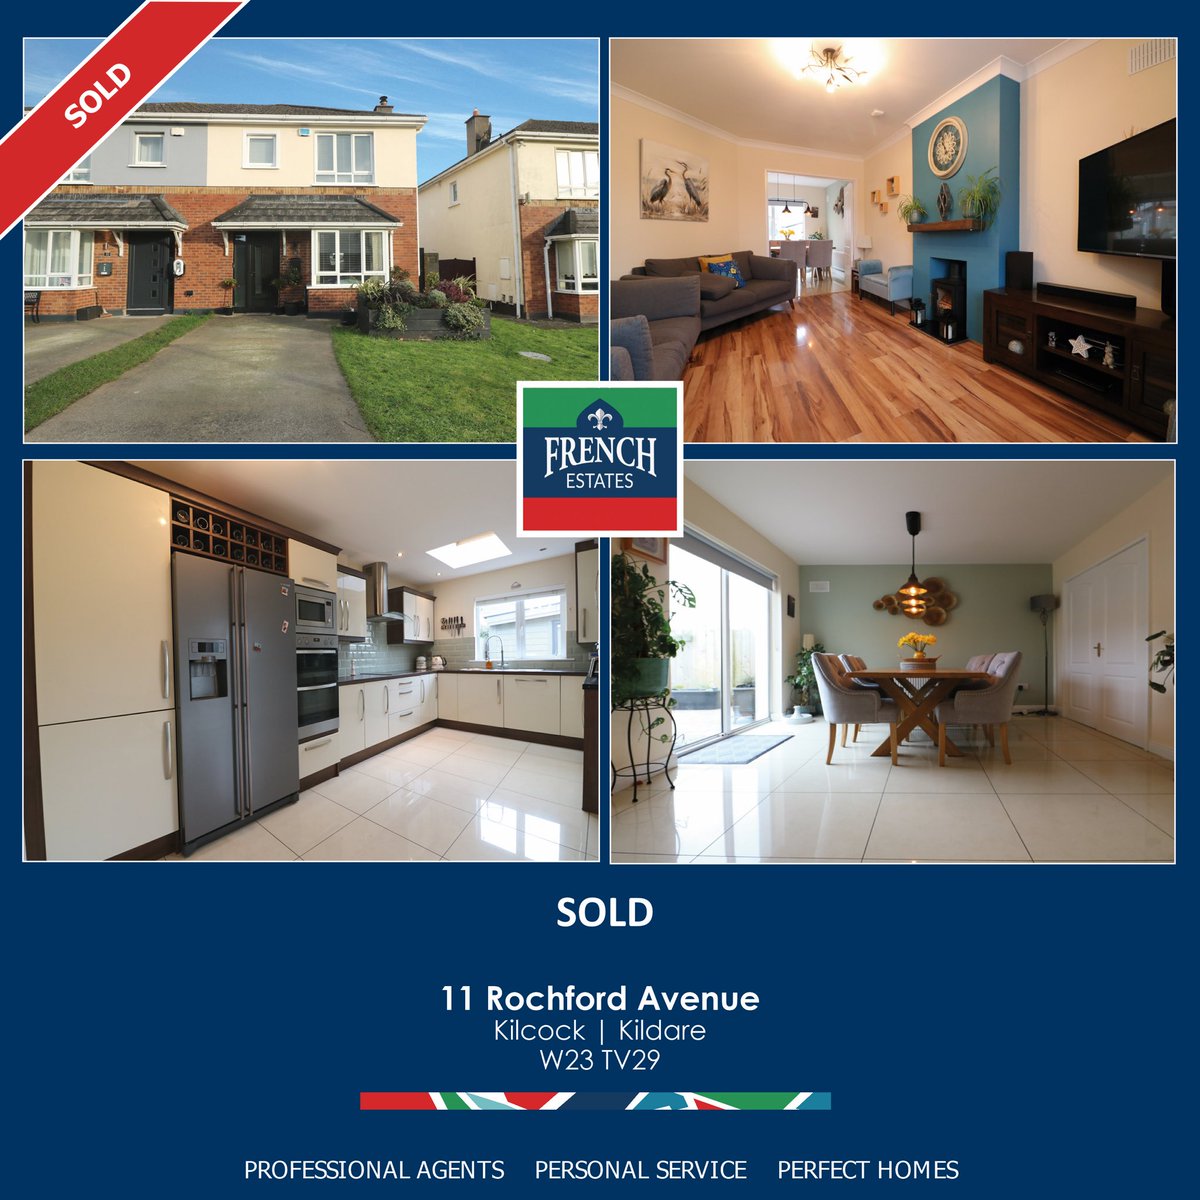 We are delighted to get another sale across the line. Wishing the new owners many years of happiness in their new home 🏠
Are you thinking of selling?
#FrenchEstates #ExperienceMatters #50years #Sold #NewHome #Kilcock #Kildare #RealEstate #IrishRealEstate #PropertyProfessionals